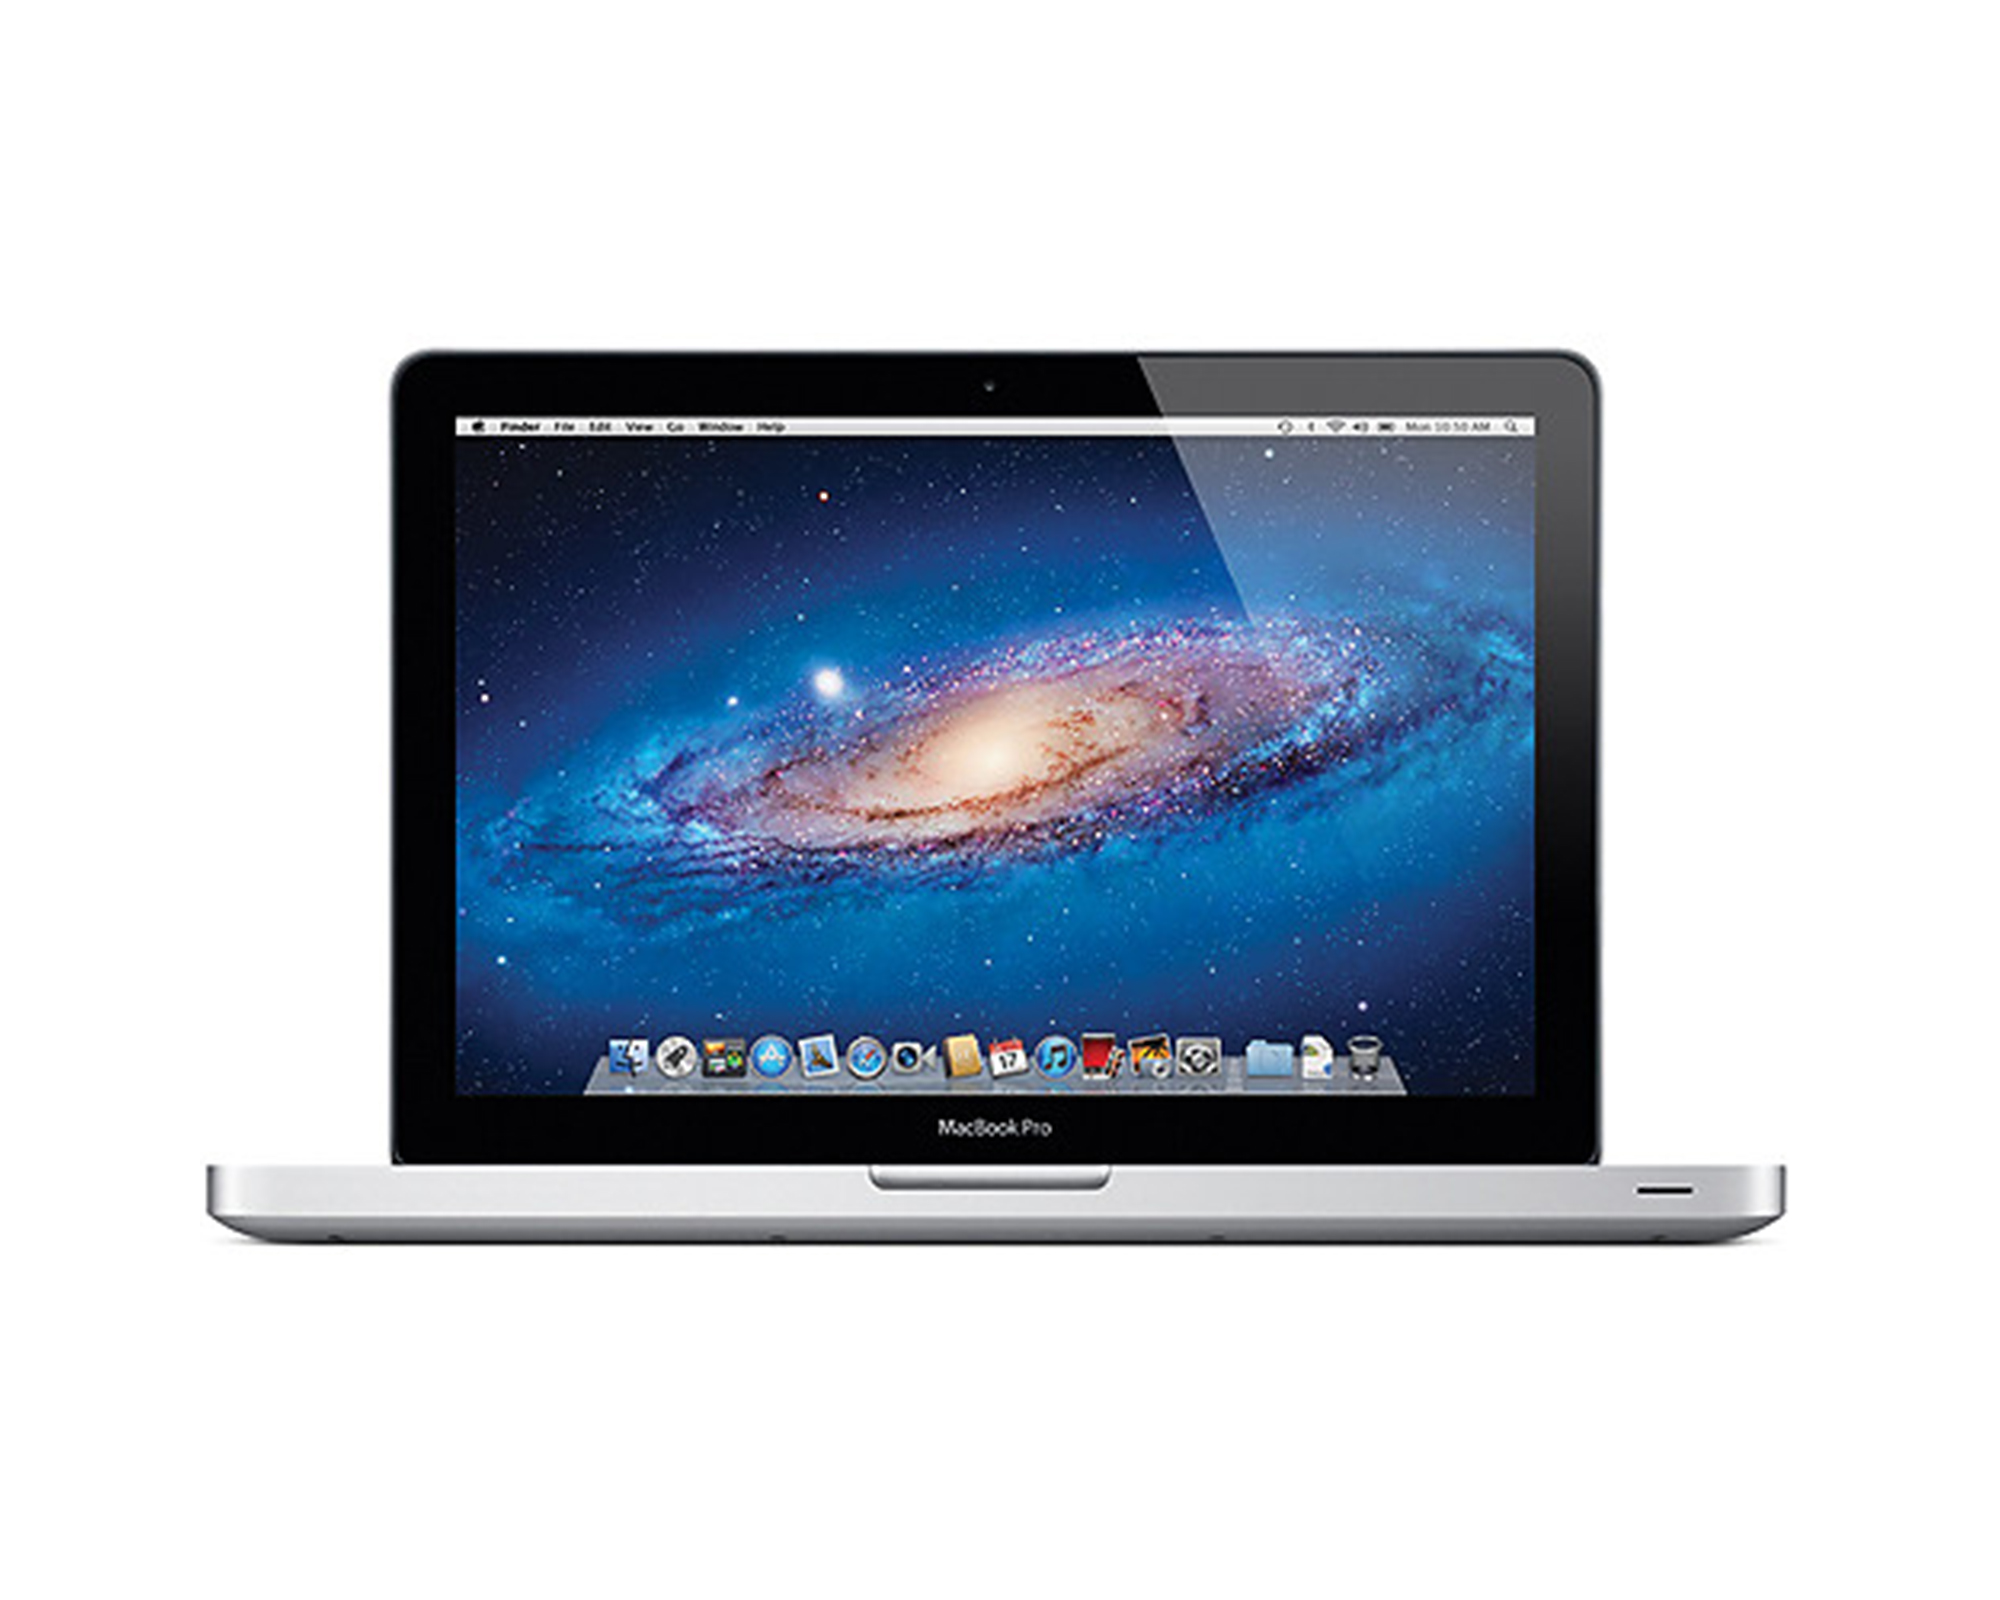 Open Box Apple MacBook Pro Laptop 13.3-inch Display, 8GB RAM, 500GB HDD, Intel Core i7 2.9GHz, Mac OS, MD102LL/A (Non-Retail Packaging) - image 5 of 7